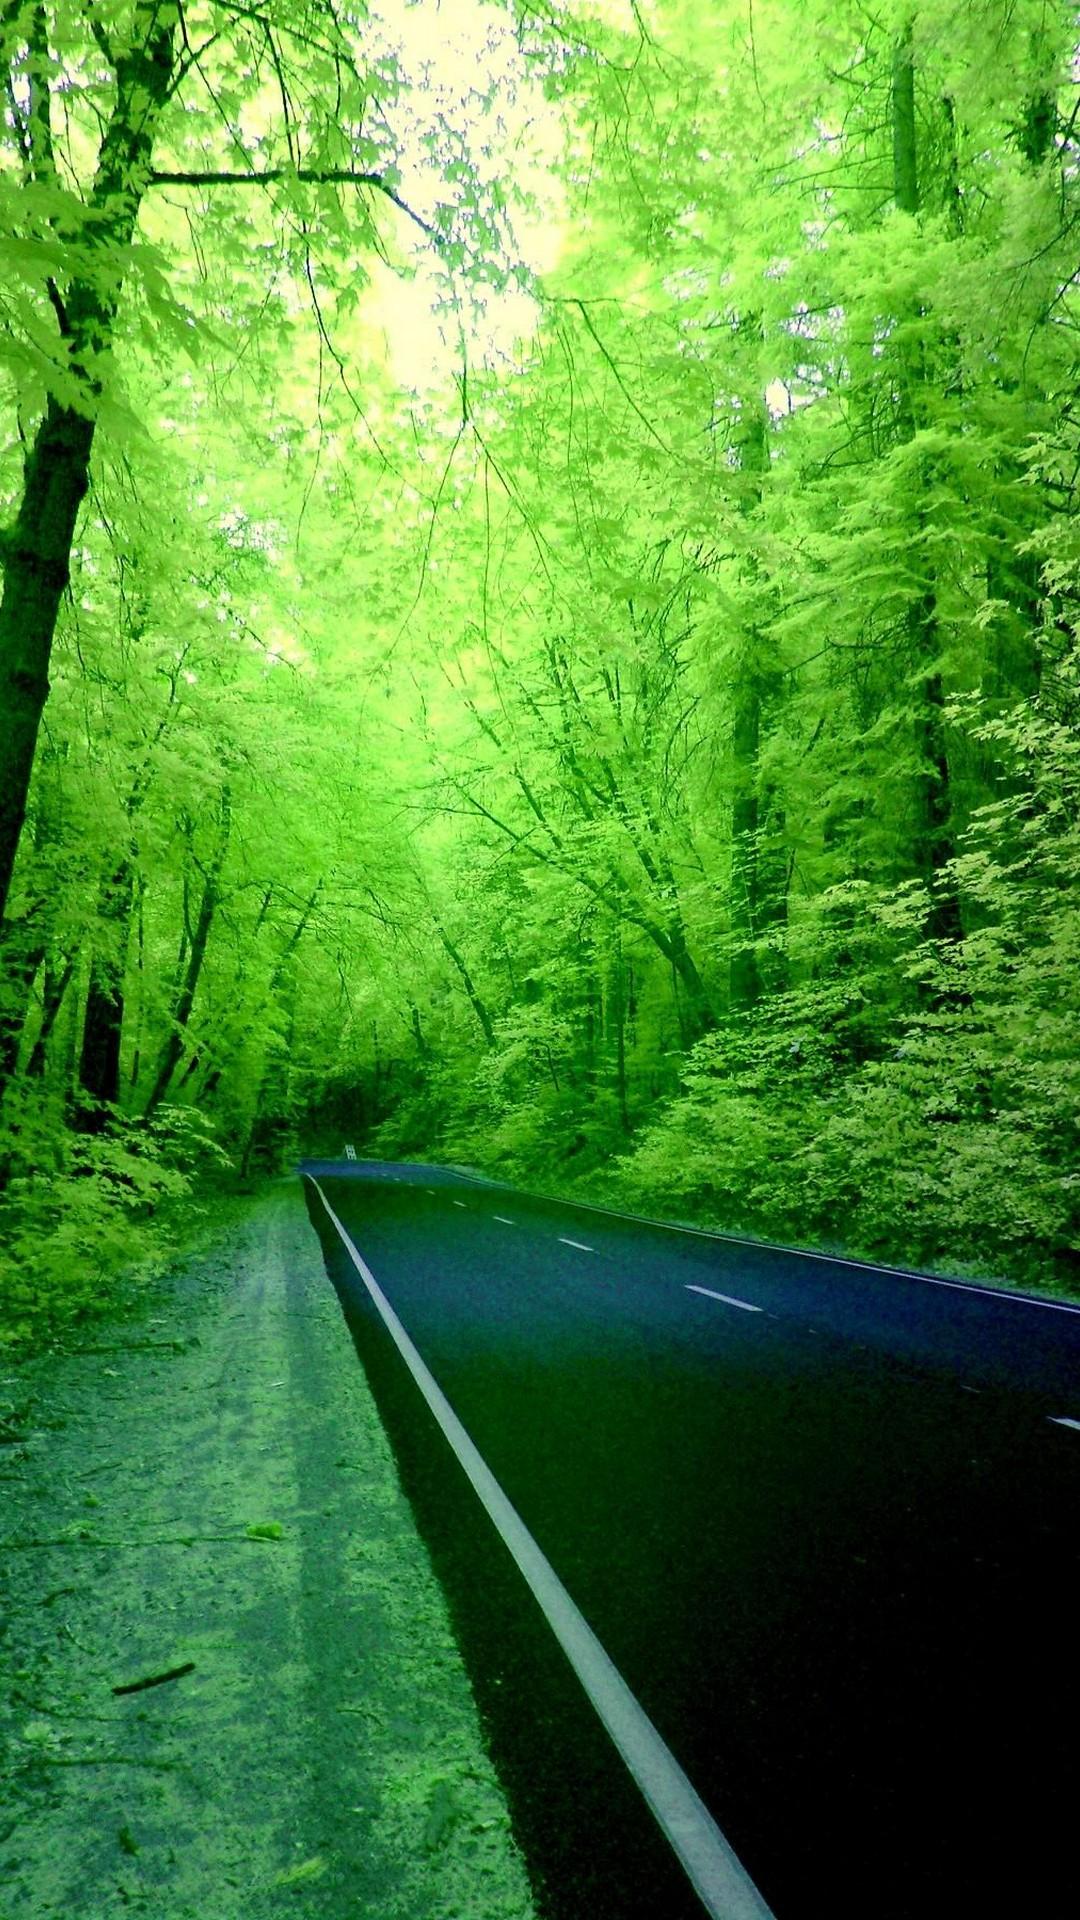 HD wallpaper: Road with a green tree, street, transportation, travel,  highway | Wallpaper Flare